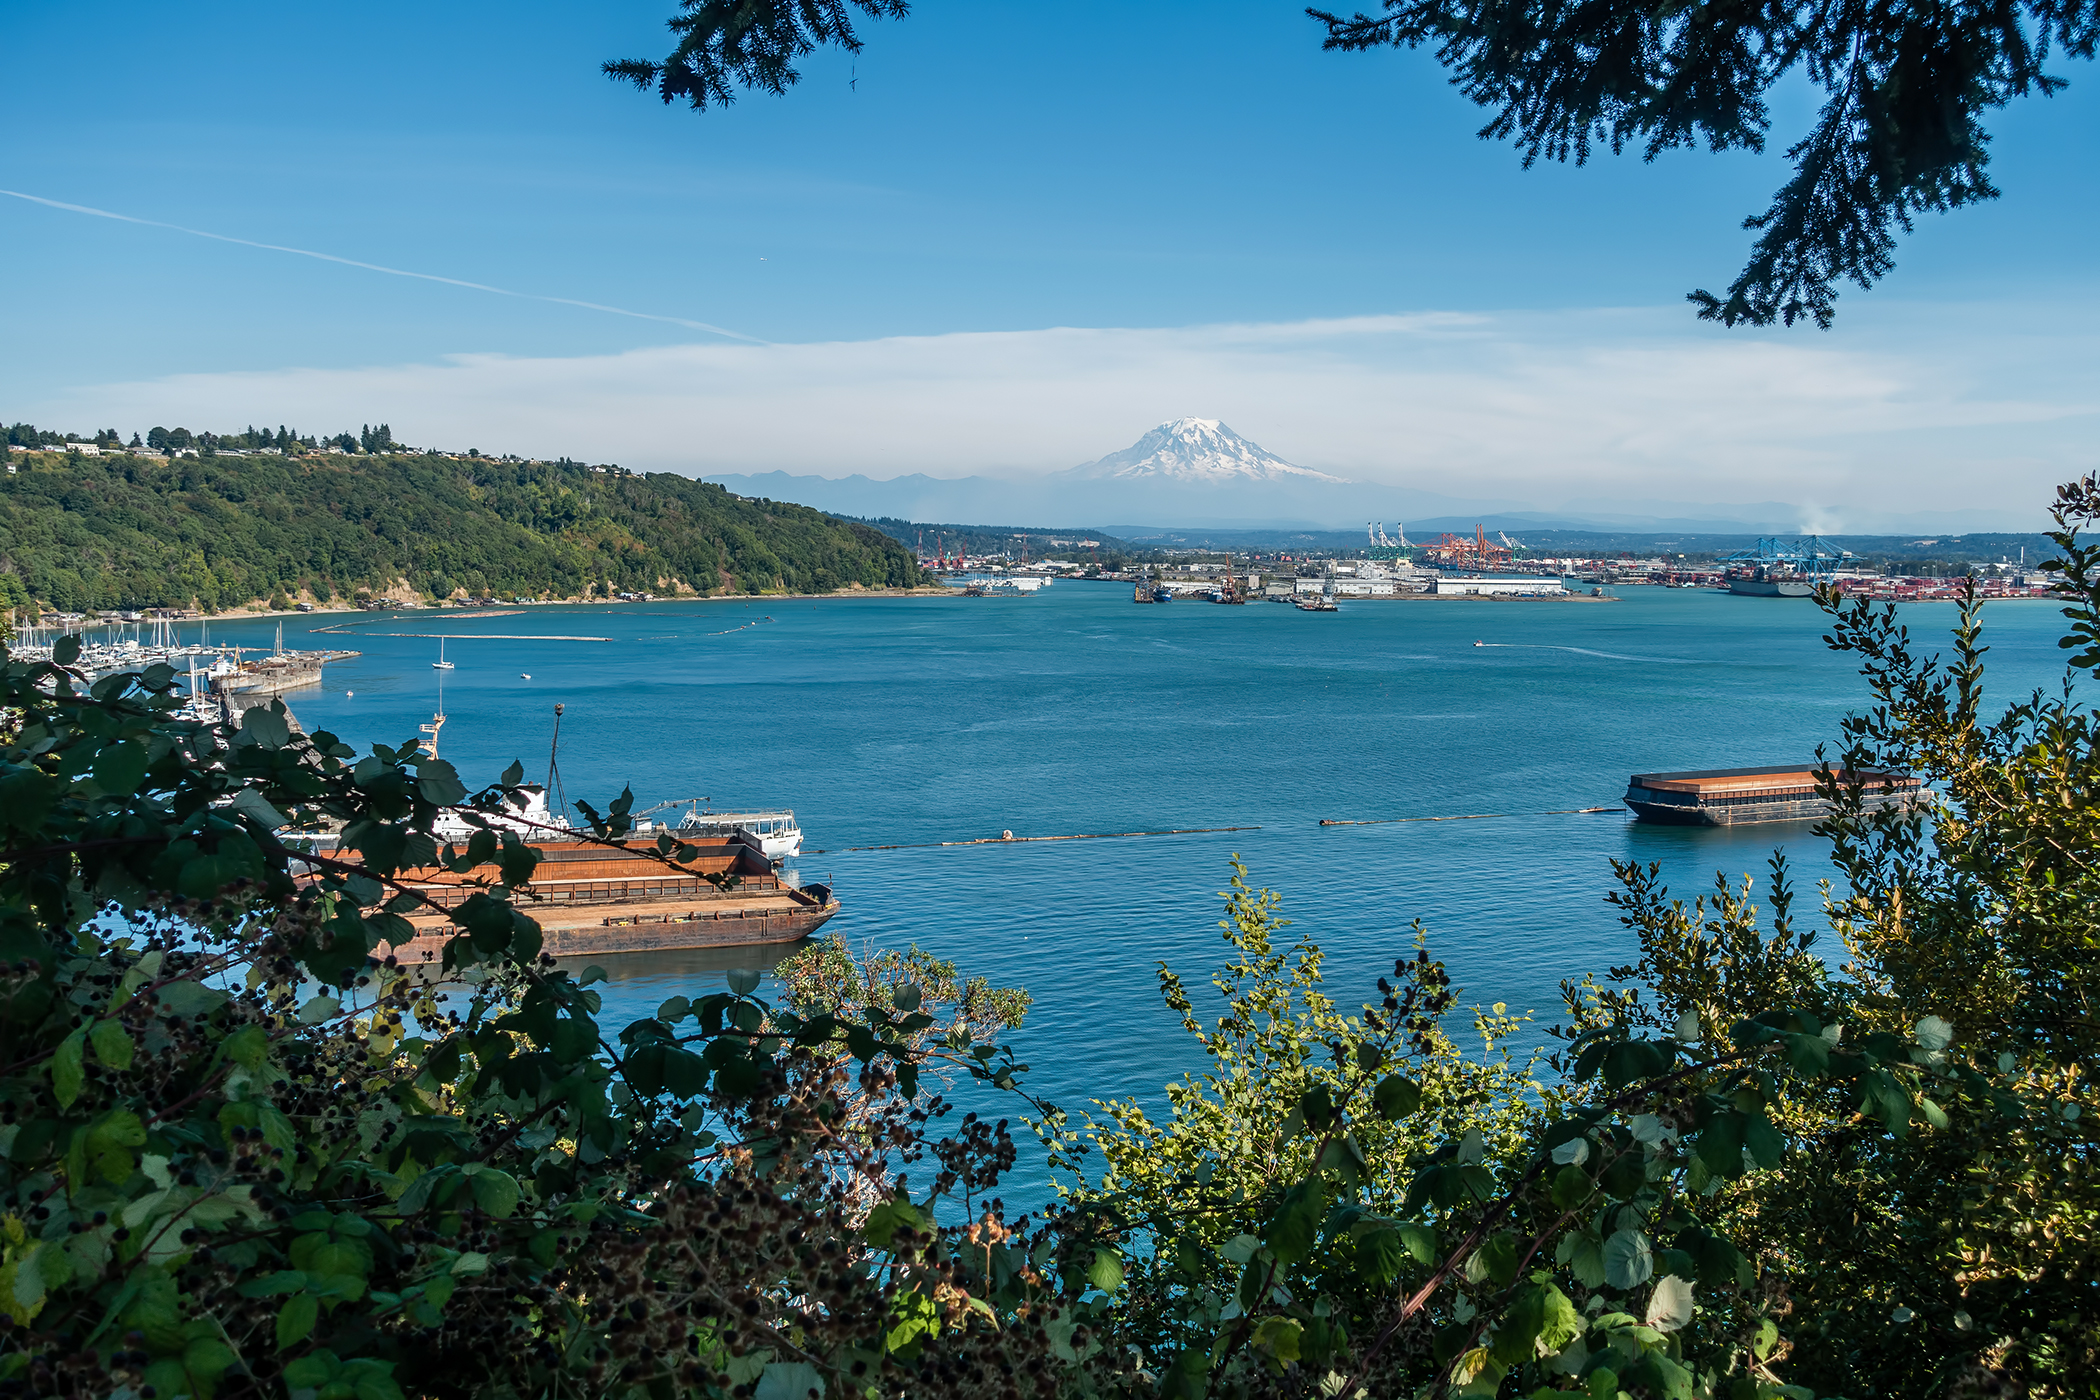 A view of the Port of Tacoma with Mount Rainier in the distance.